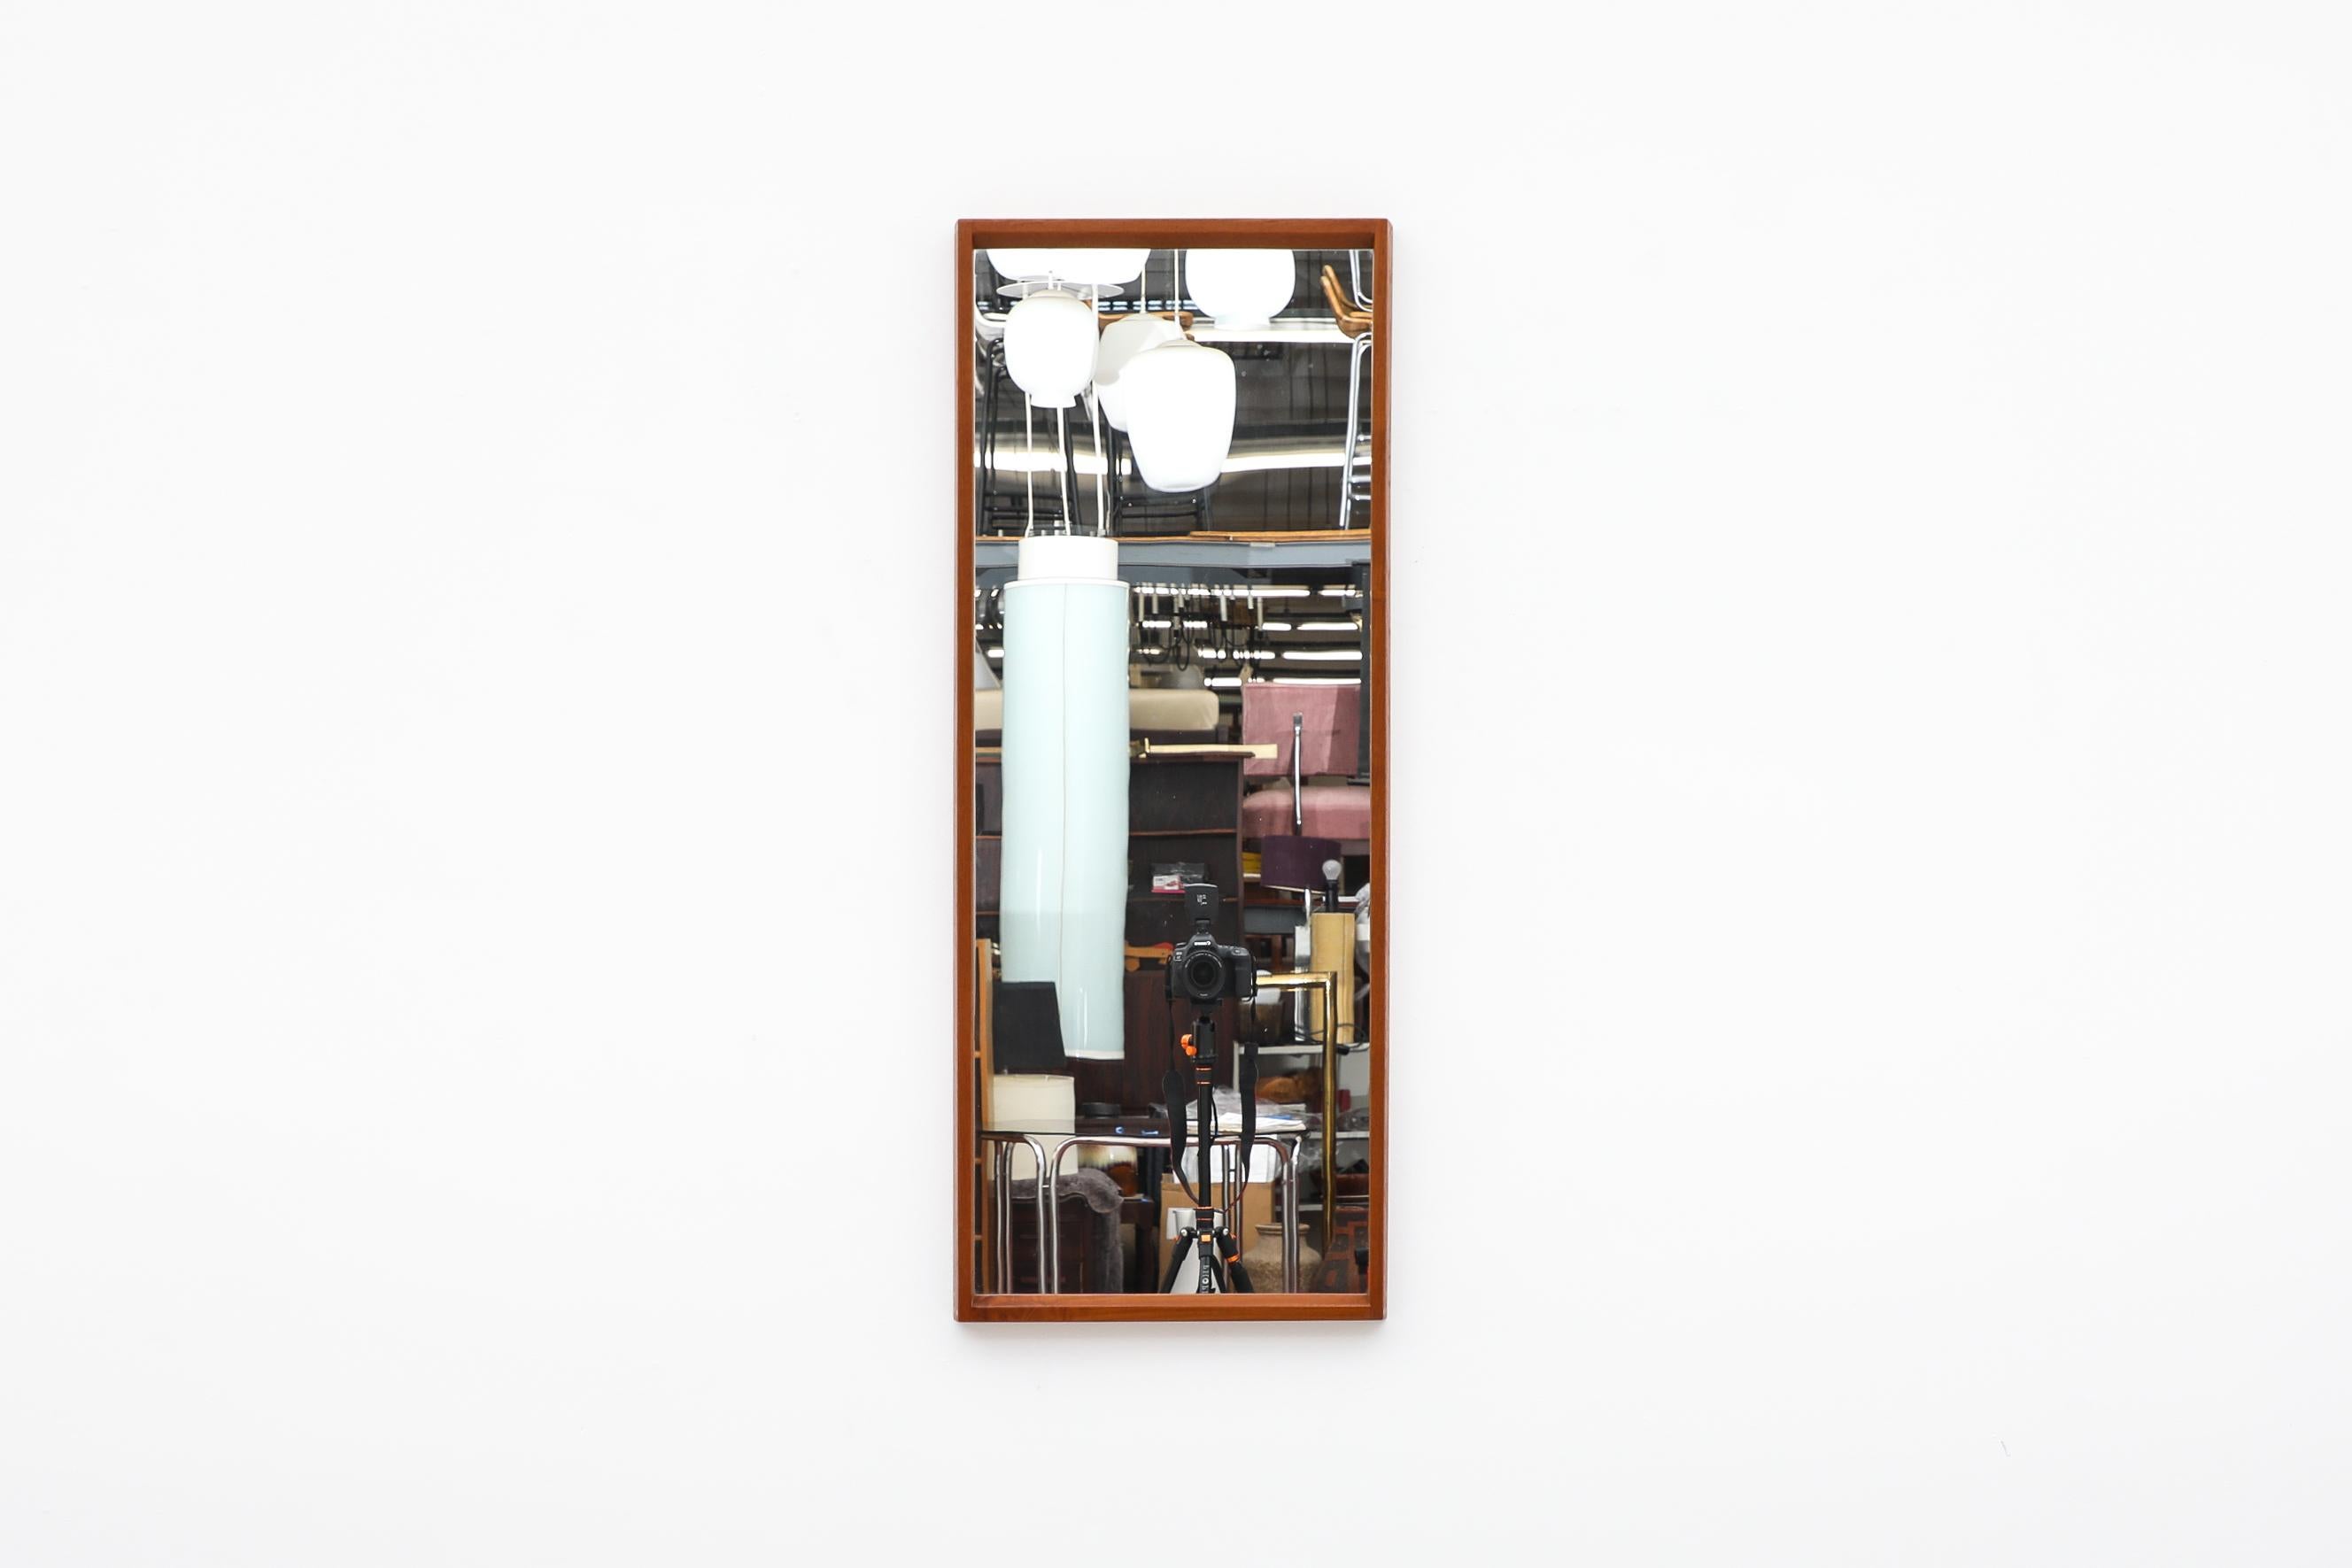 Midcenury teak wall mount mirror designed by Aksel Kjersgaard for Odder. Joints have a handsome peg detail. In original condition with visible wear consistent with its age and use.